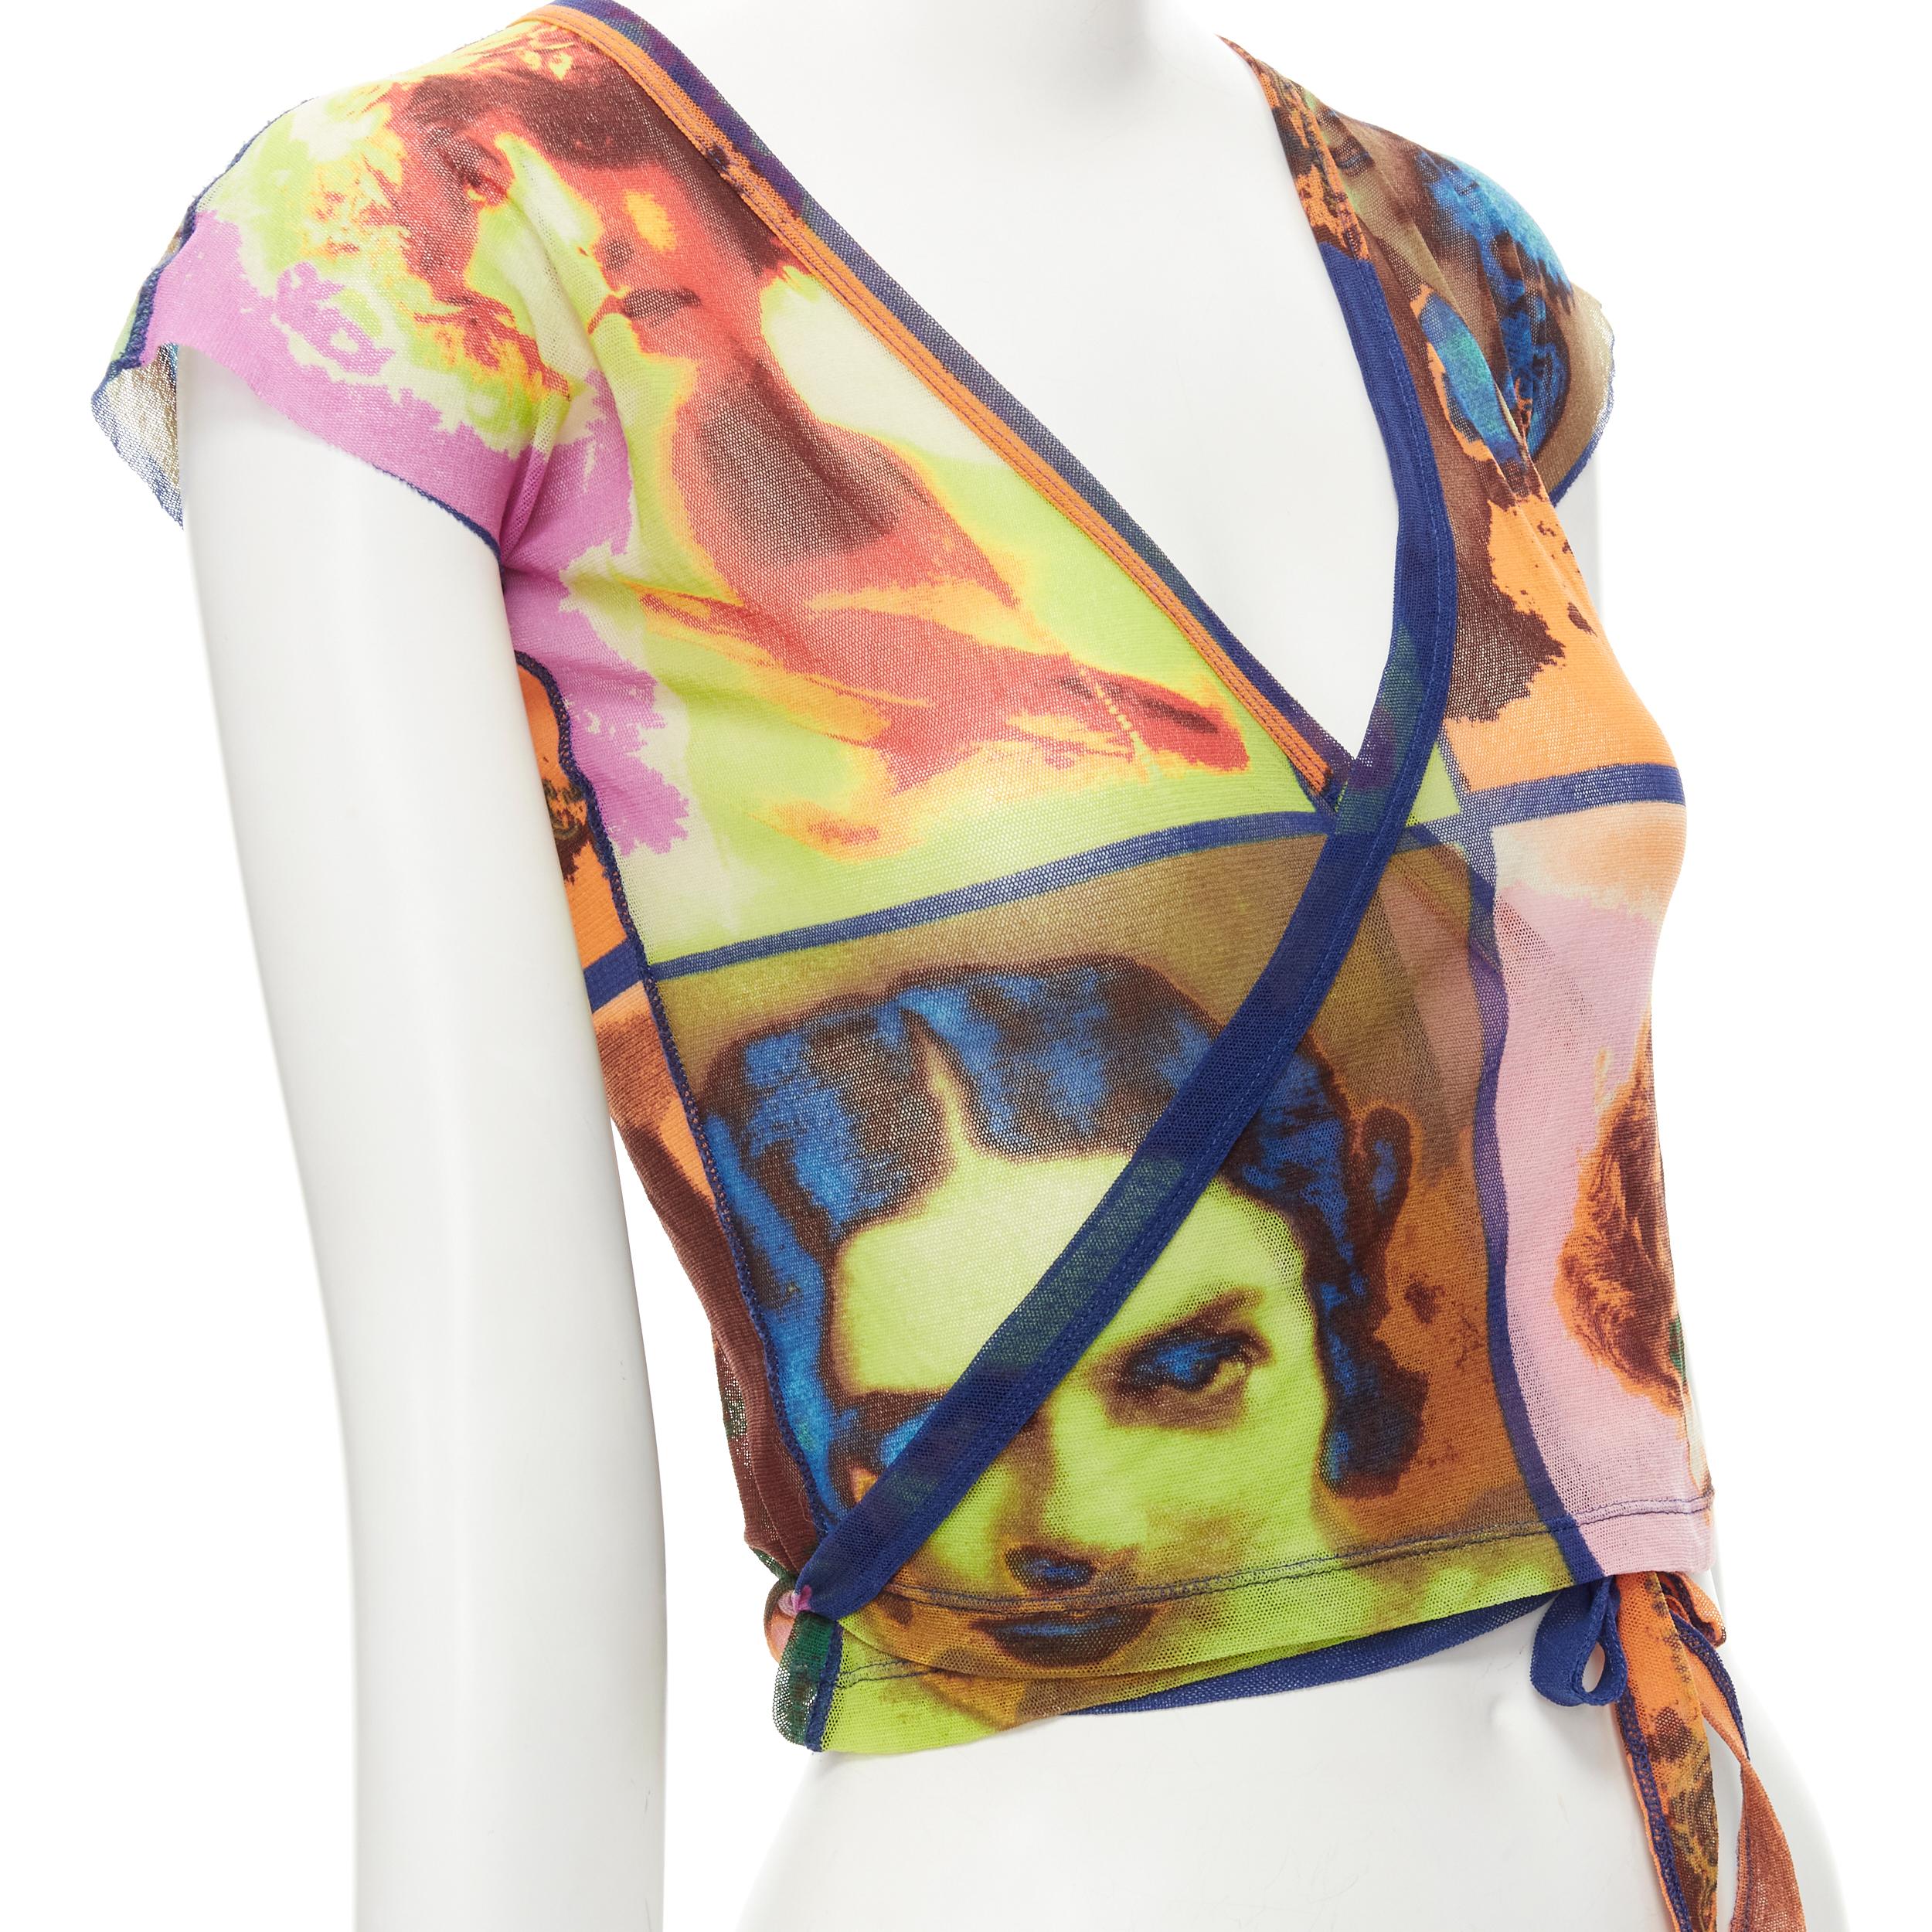 JEAN PAUL GAULTIER Soleil Vintage 2002 Portaits print sheer wrap tie top shirt M 
Reference: TGAS/C01040 
Brand: Jean Paul Gaultier Soleil 
Designer: Jean Paul Gaultier 
Collection: Spring Summer 2002 Portraits Runway 
Material: Polyester 
Color: